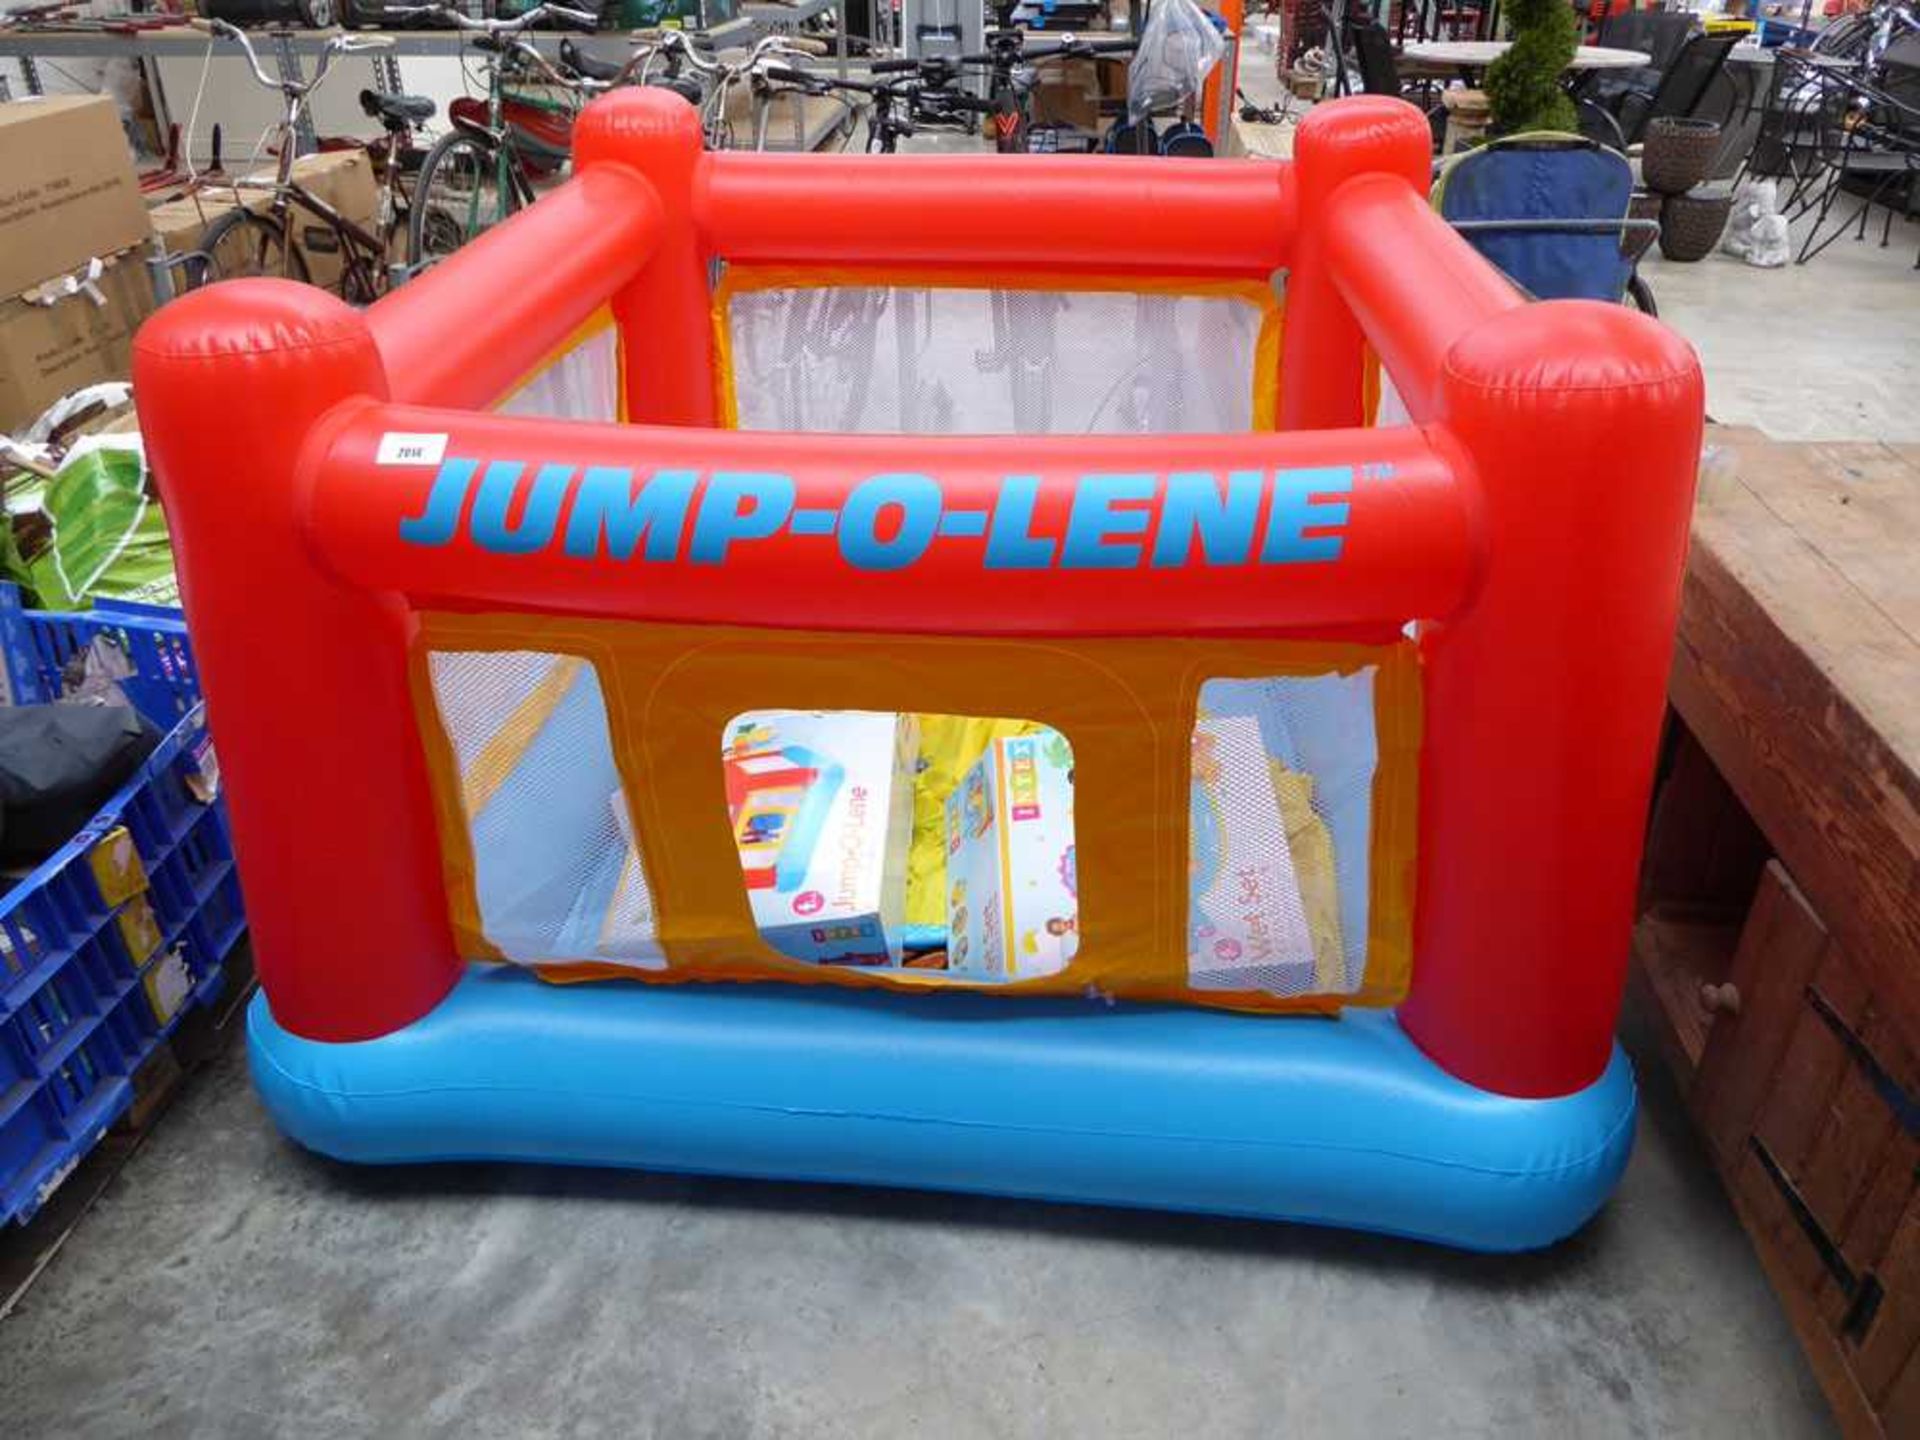 +VAT Intex inflatable Jump-o-Lene, together with 1 boxed Intex inflatable Jump-o-Lene and 1